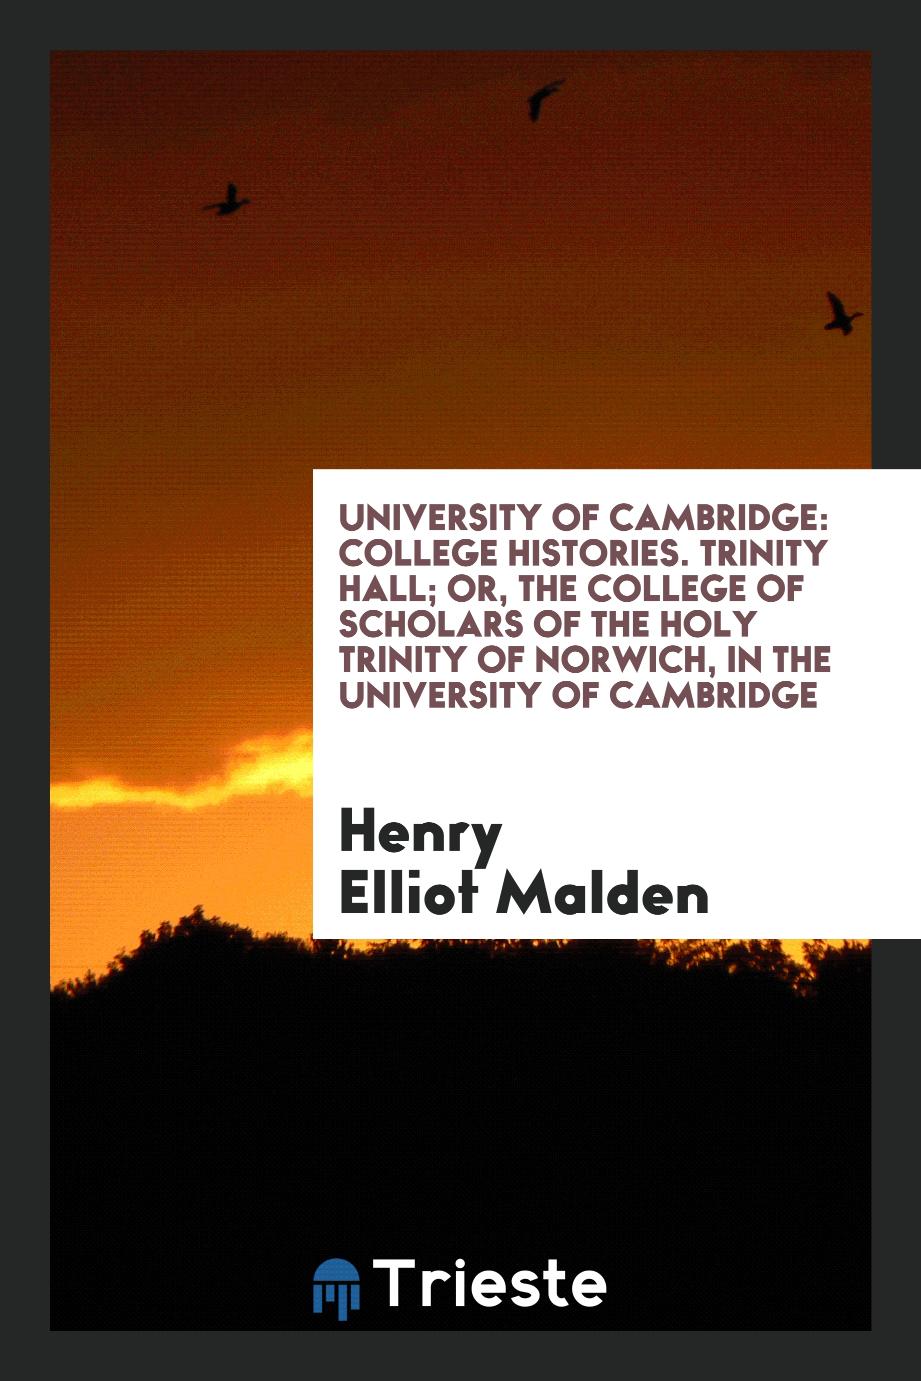 University of Cambridge: College Histories. Trinity Hall; Or, the College of Scholars of the Holy Trinity of Norwich, in the University of Cambridge